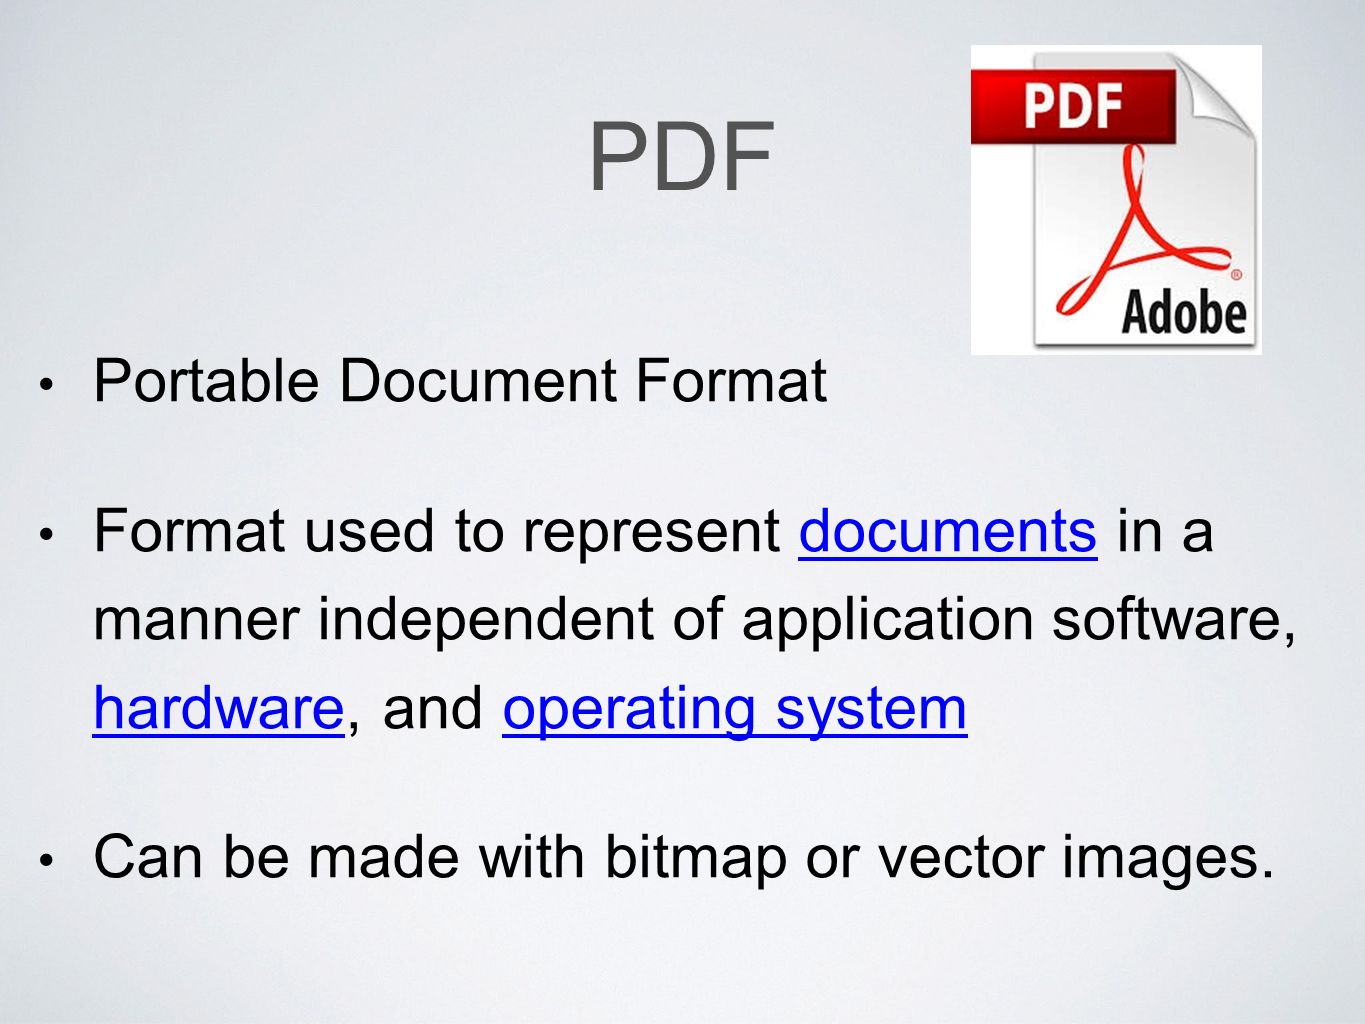 PDF Portable Document Format Format used to represent documents in a manner independent of application software, hardware, and operating systemdocuments hardwareoperating system Can be made with bitmap or vector images.